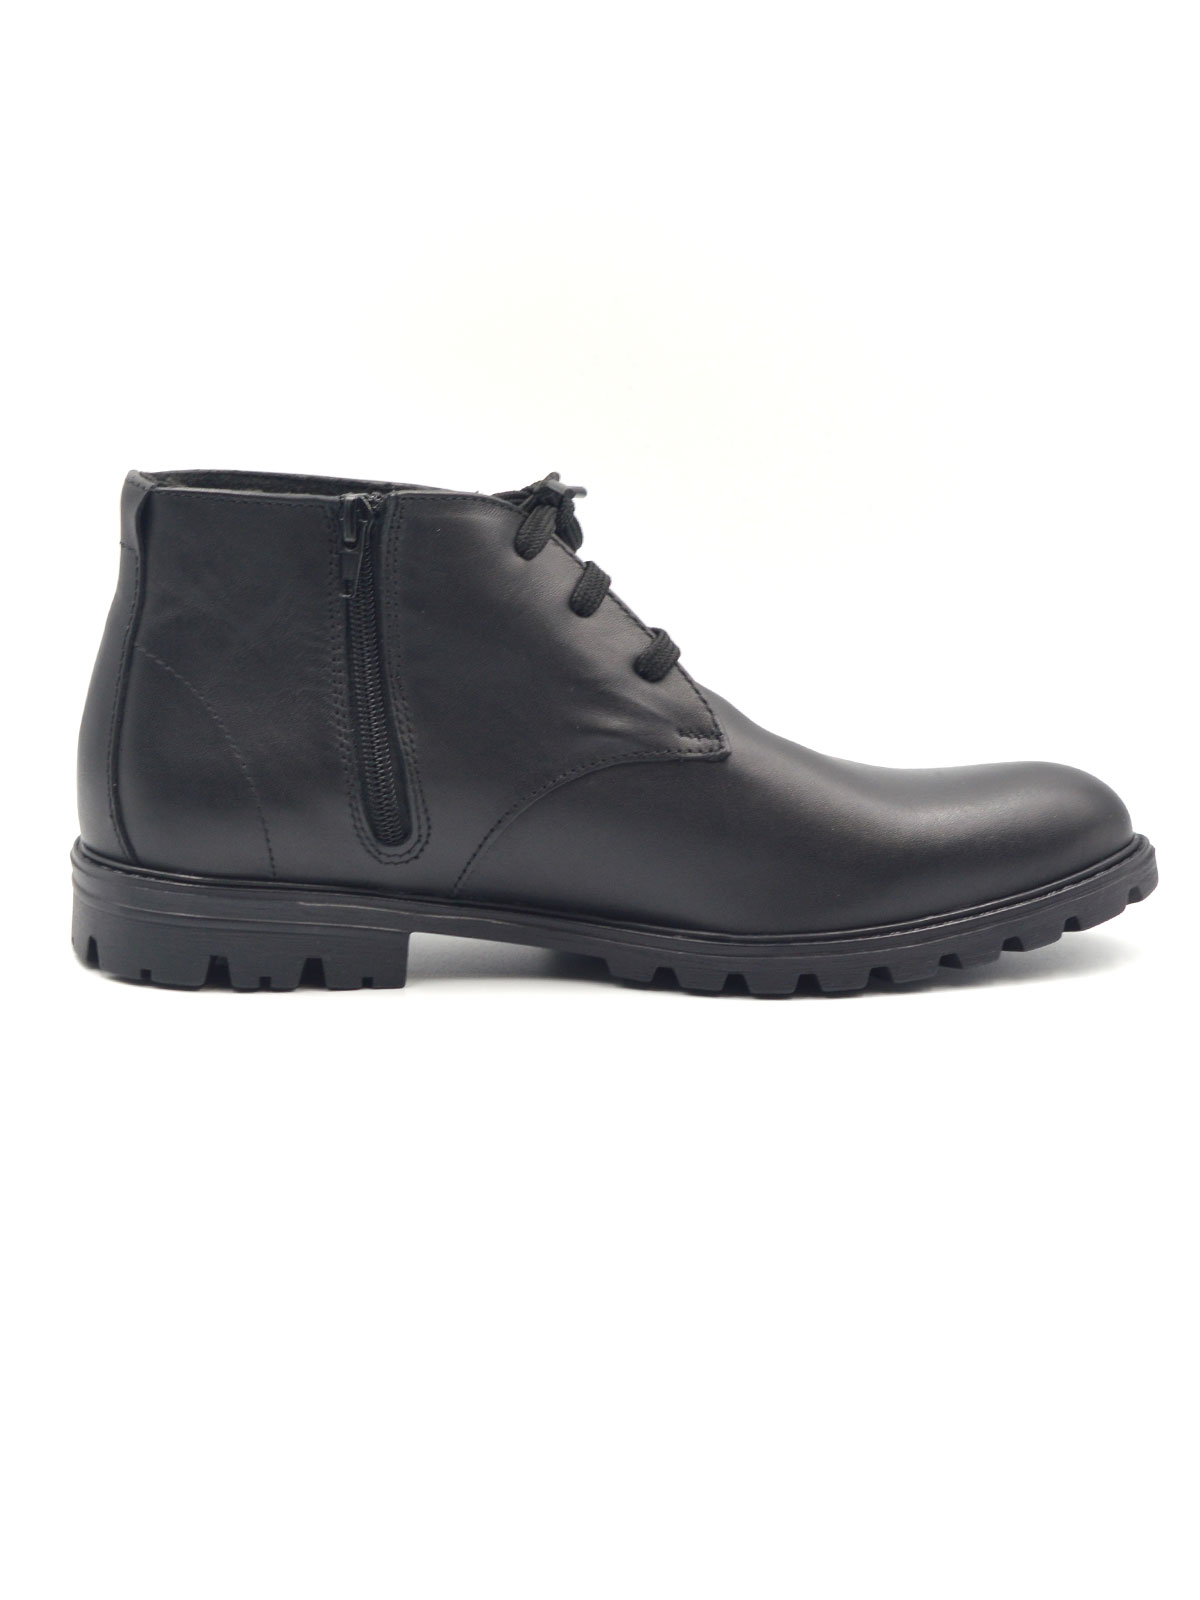 Black sporty elegant boots with laces - 81087 - € 83.24 img2